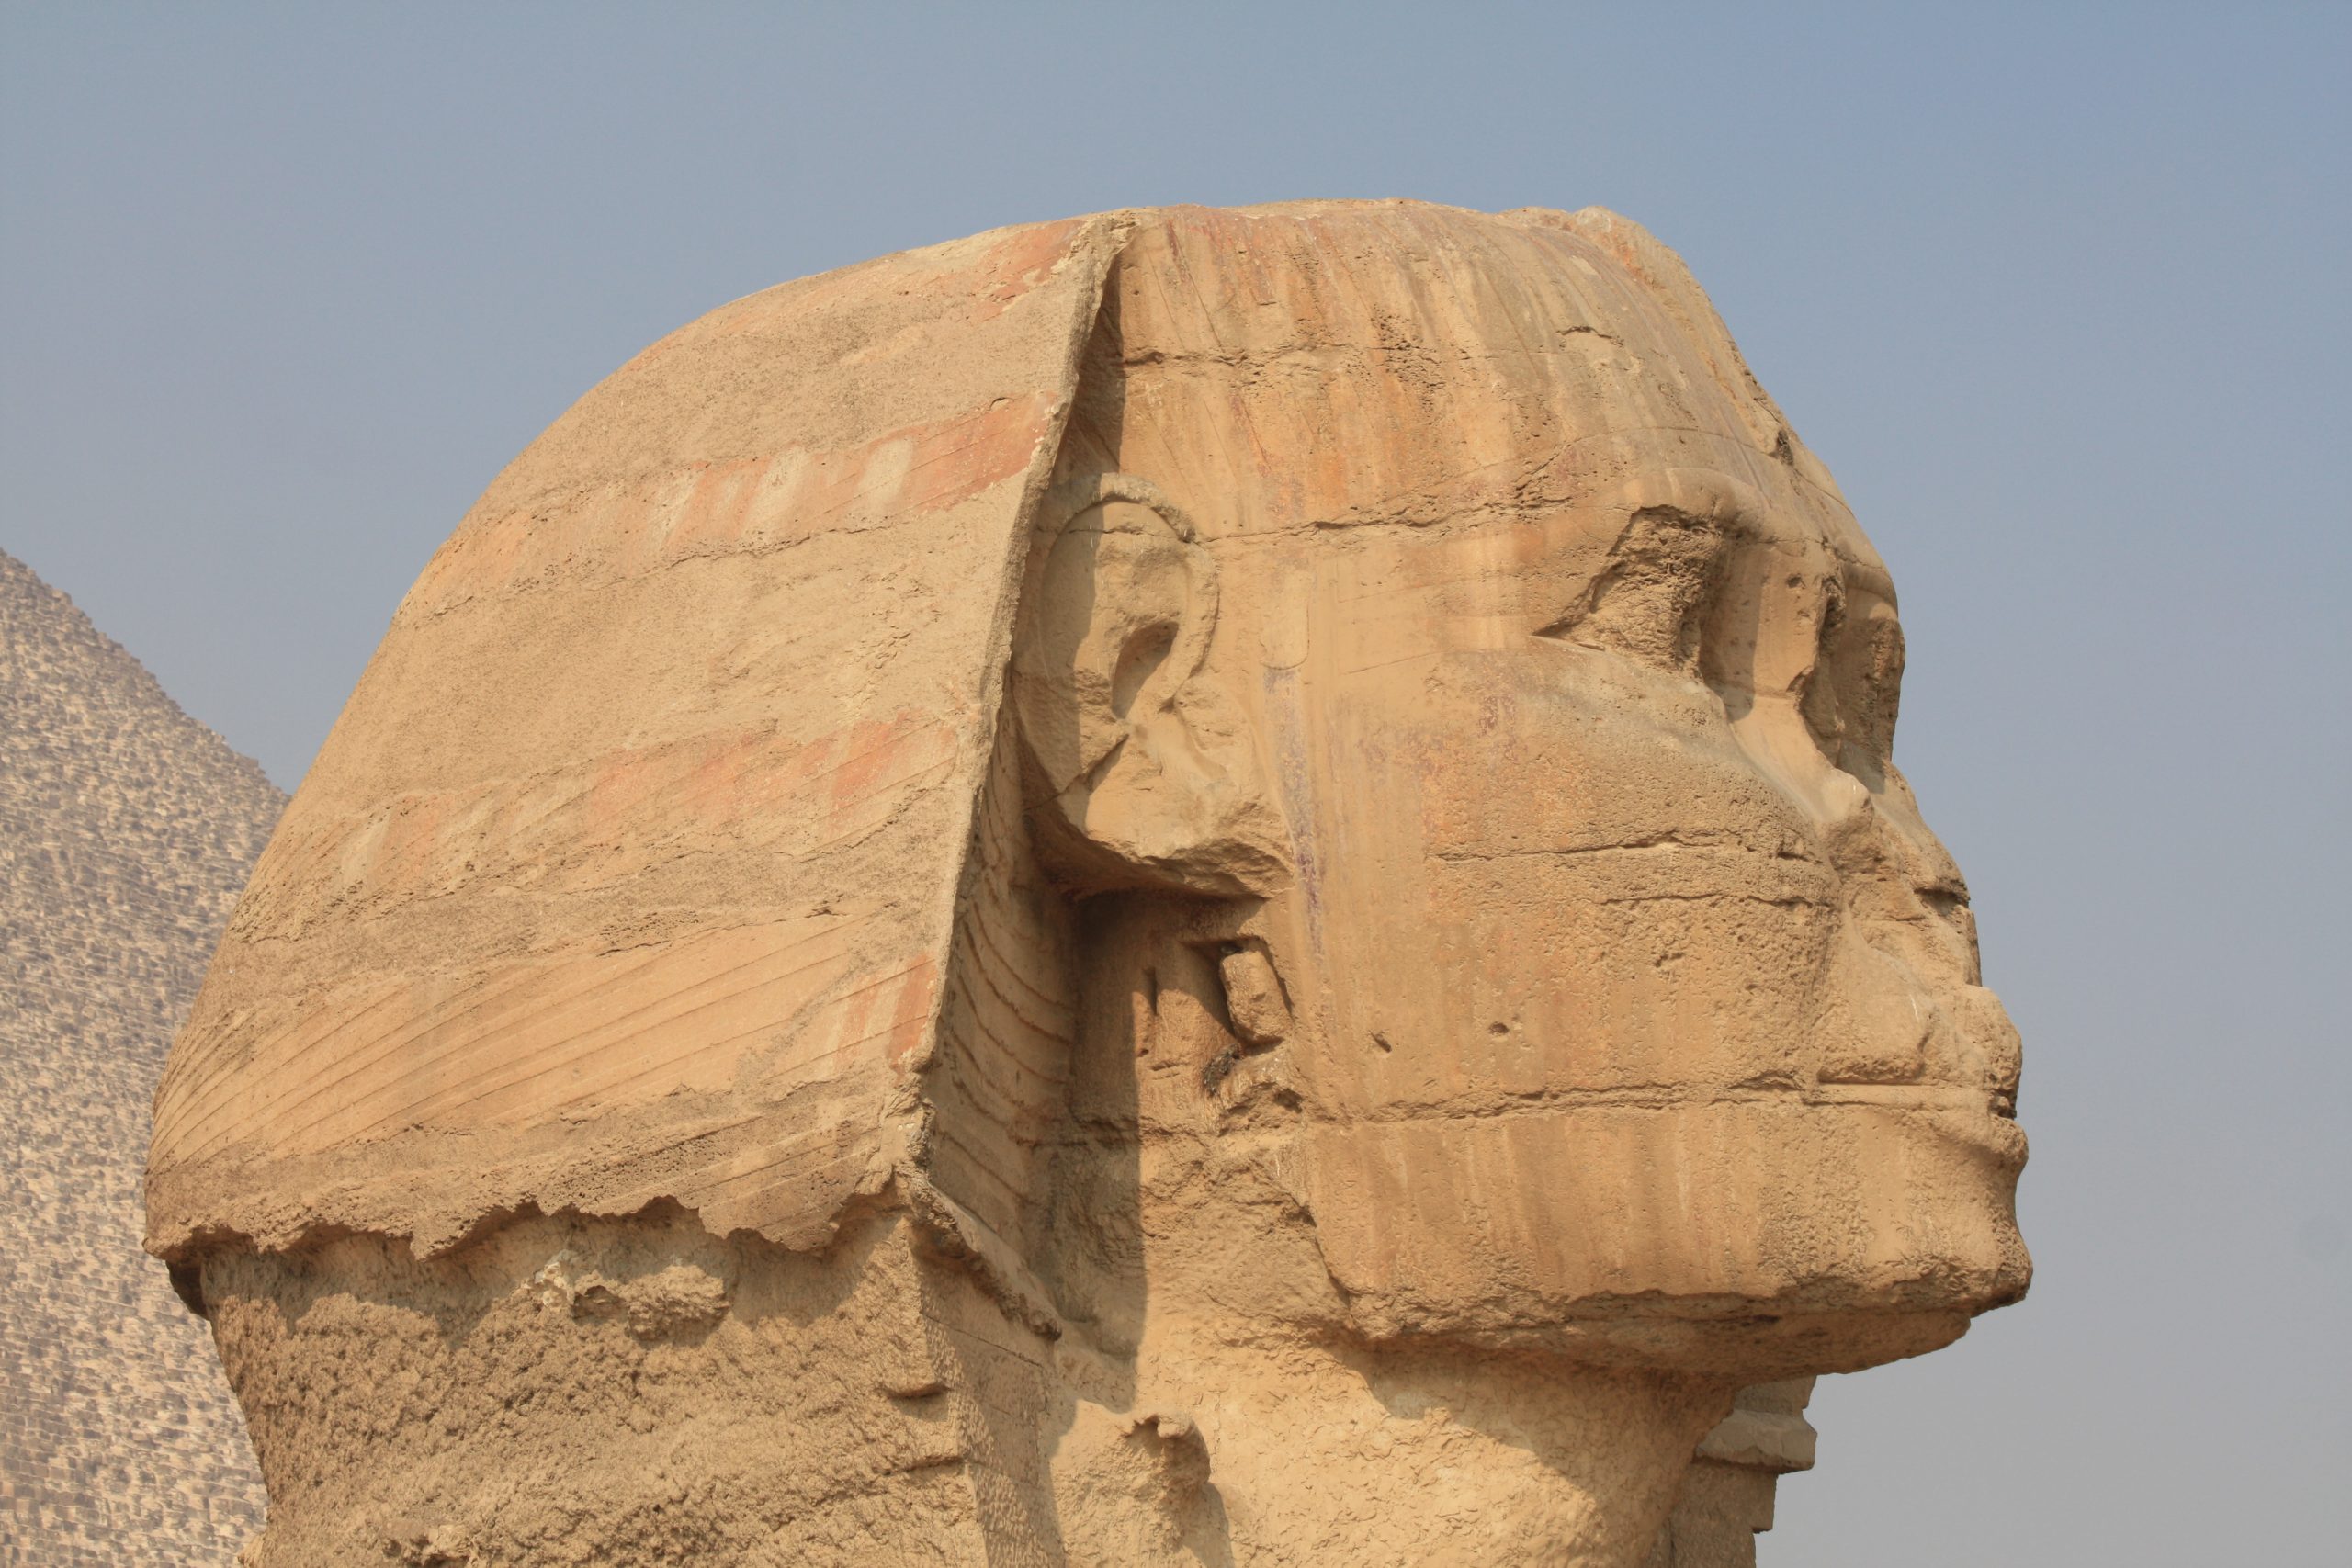 The Great Sphinx (Detail of Face), limestone, ca. 2500 B.C.E. (Giza, Egypt). Photo by Michael Lusk, CC BY-NC 2.0.